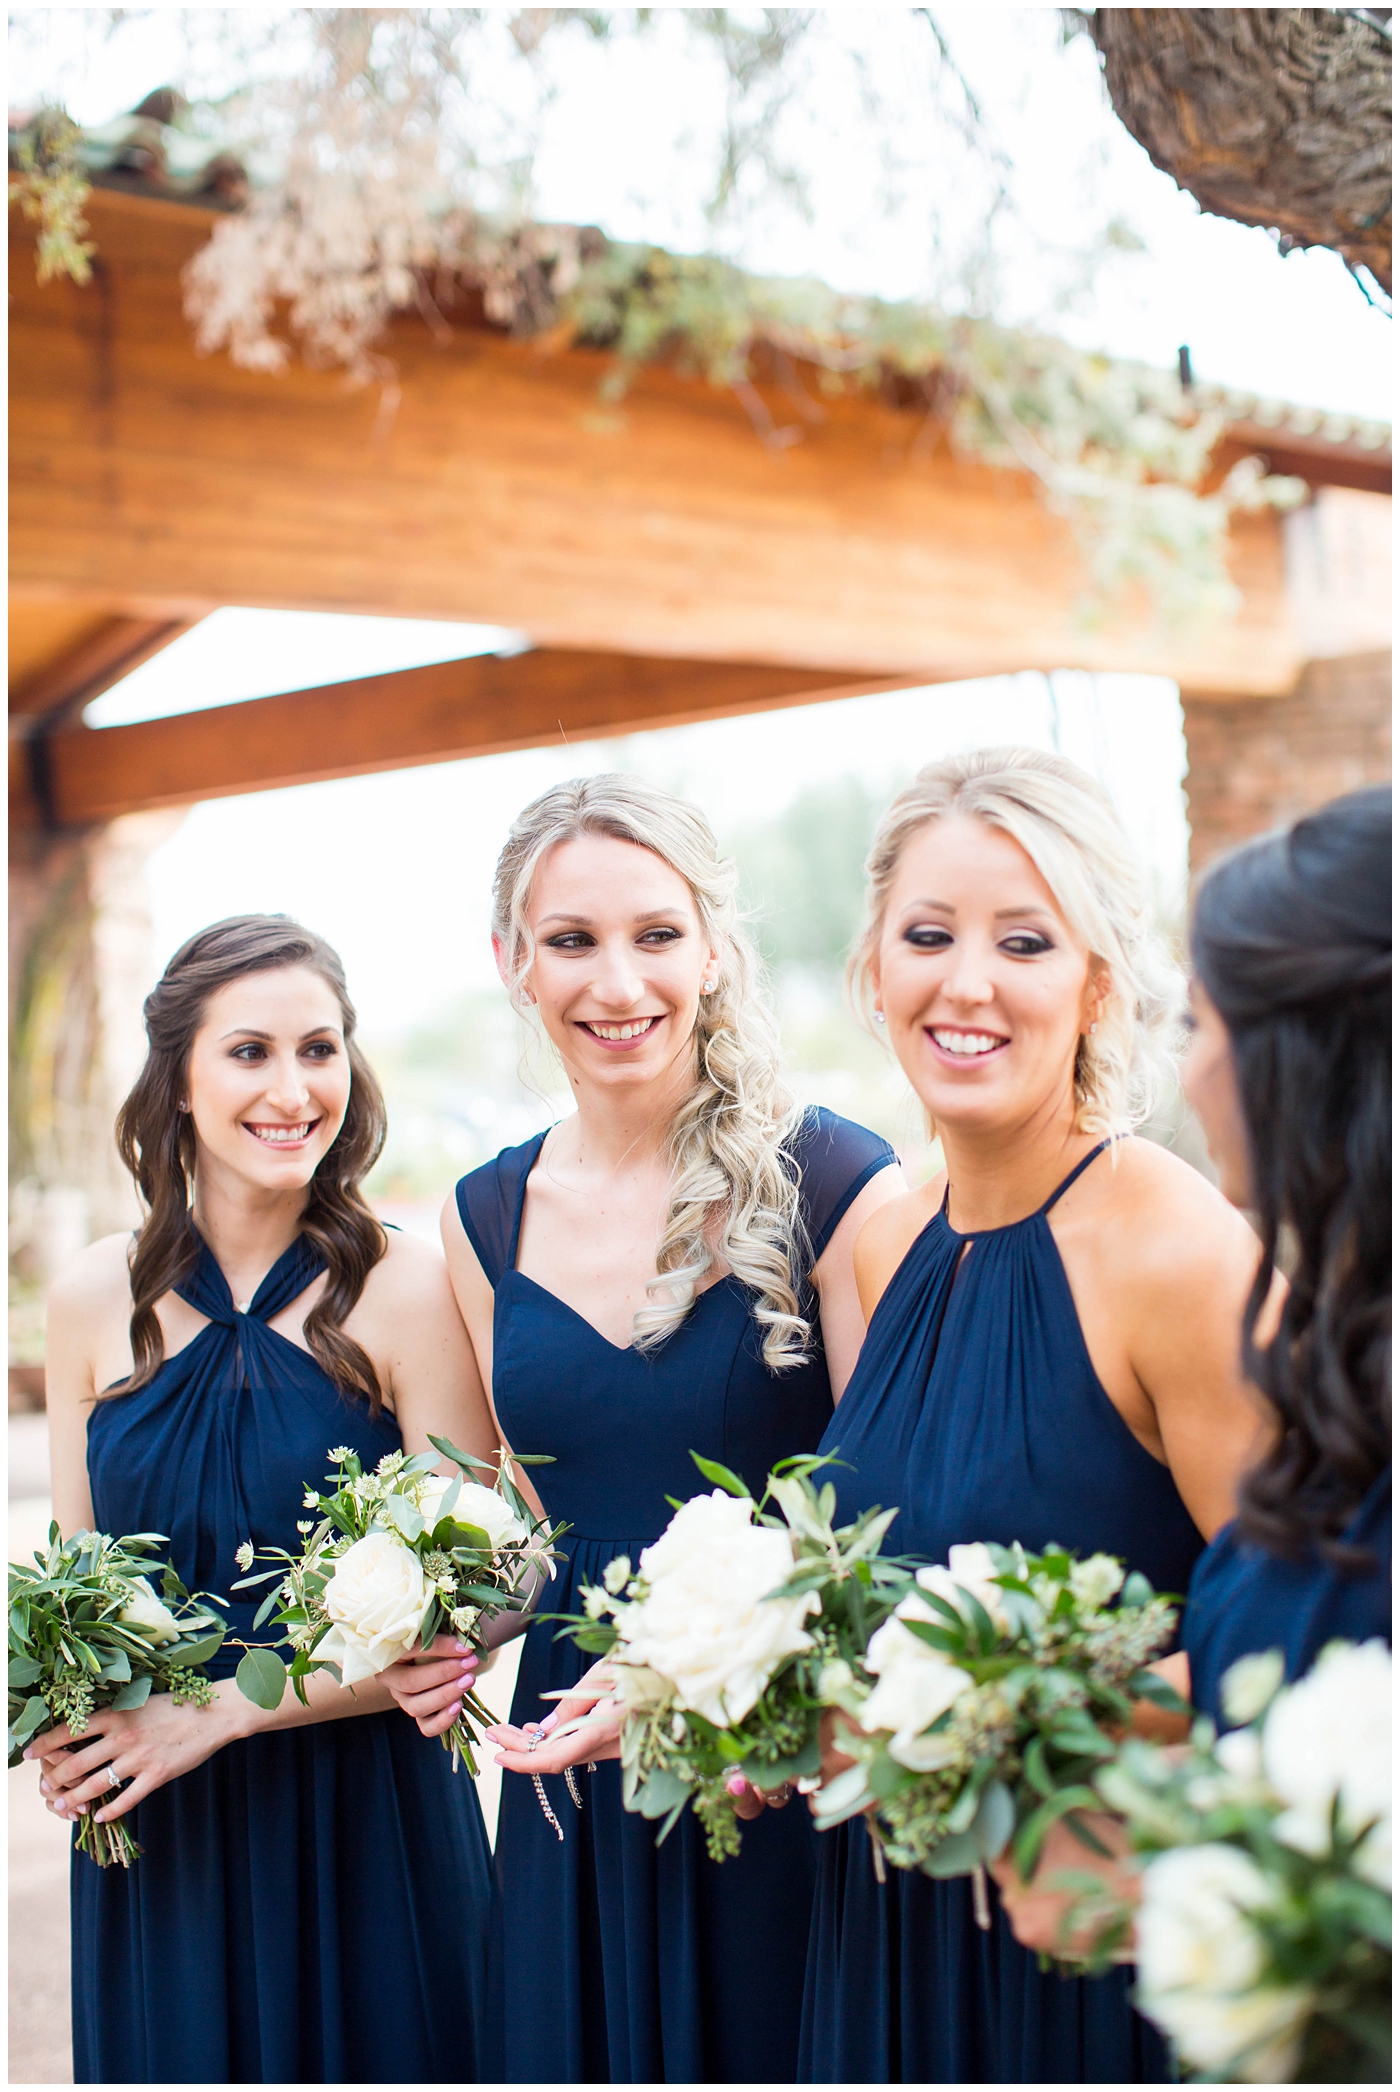 bridesmaids in assorted navy blue dresses with white rose and greenery flower bouquets on wedding day